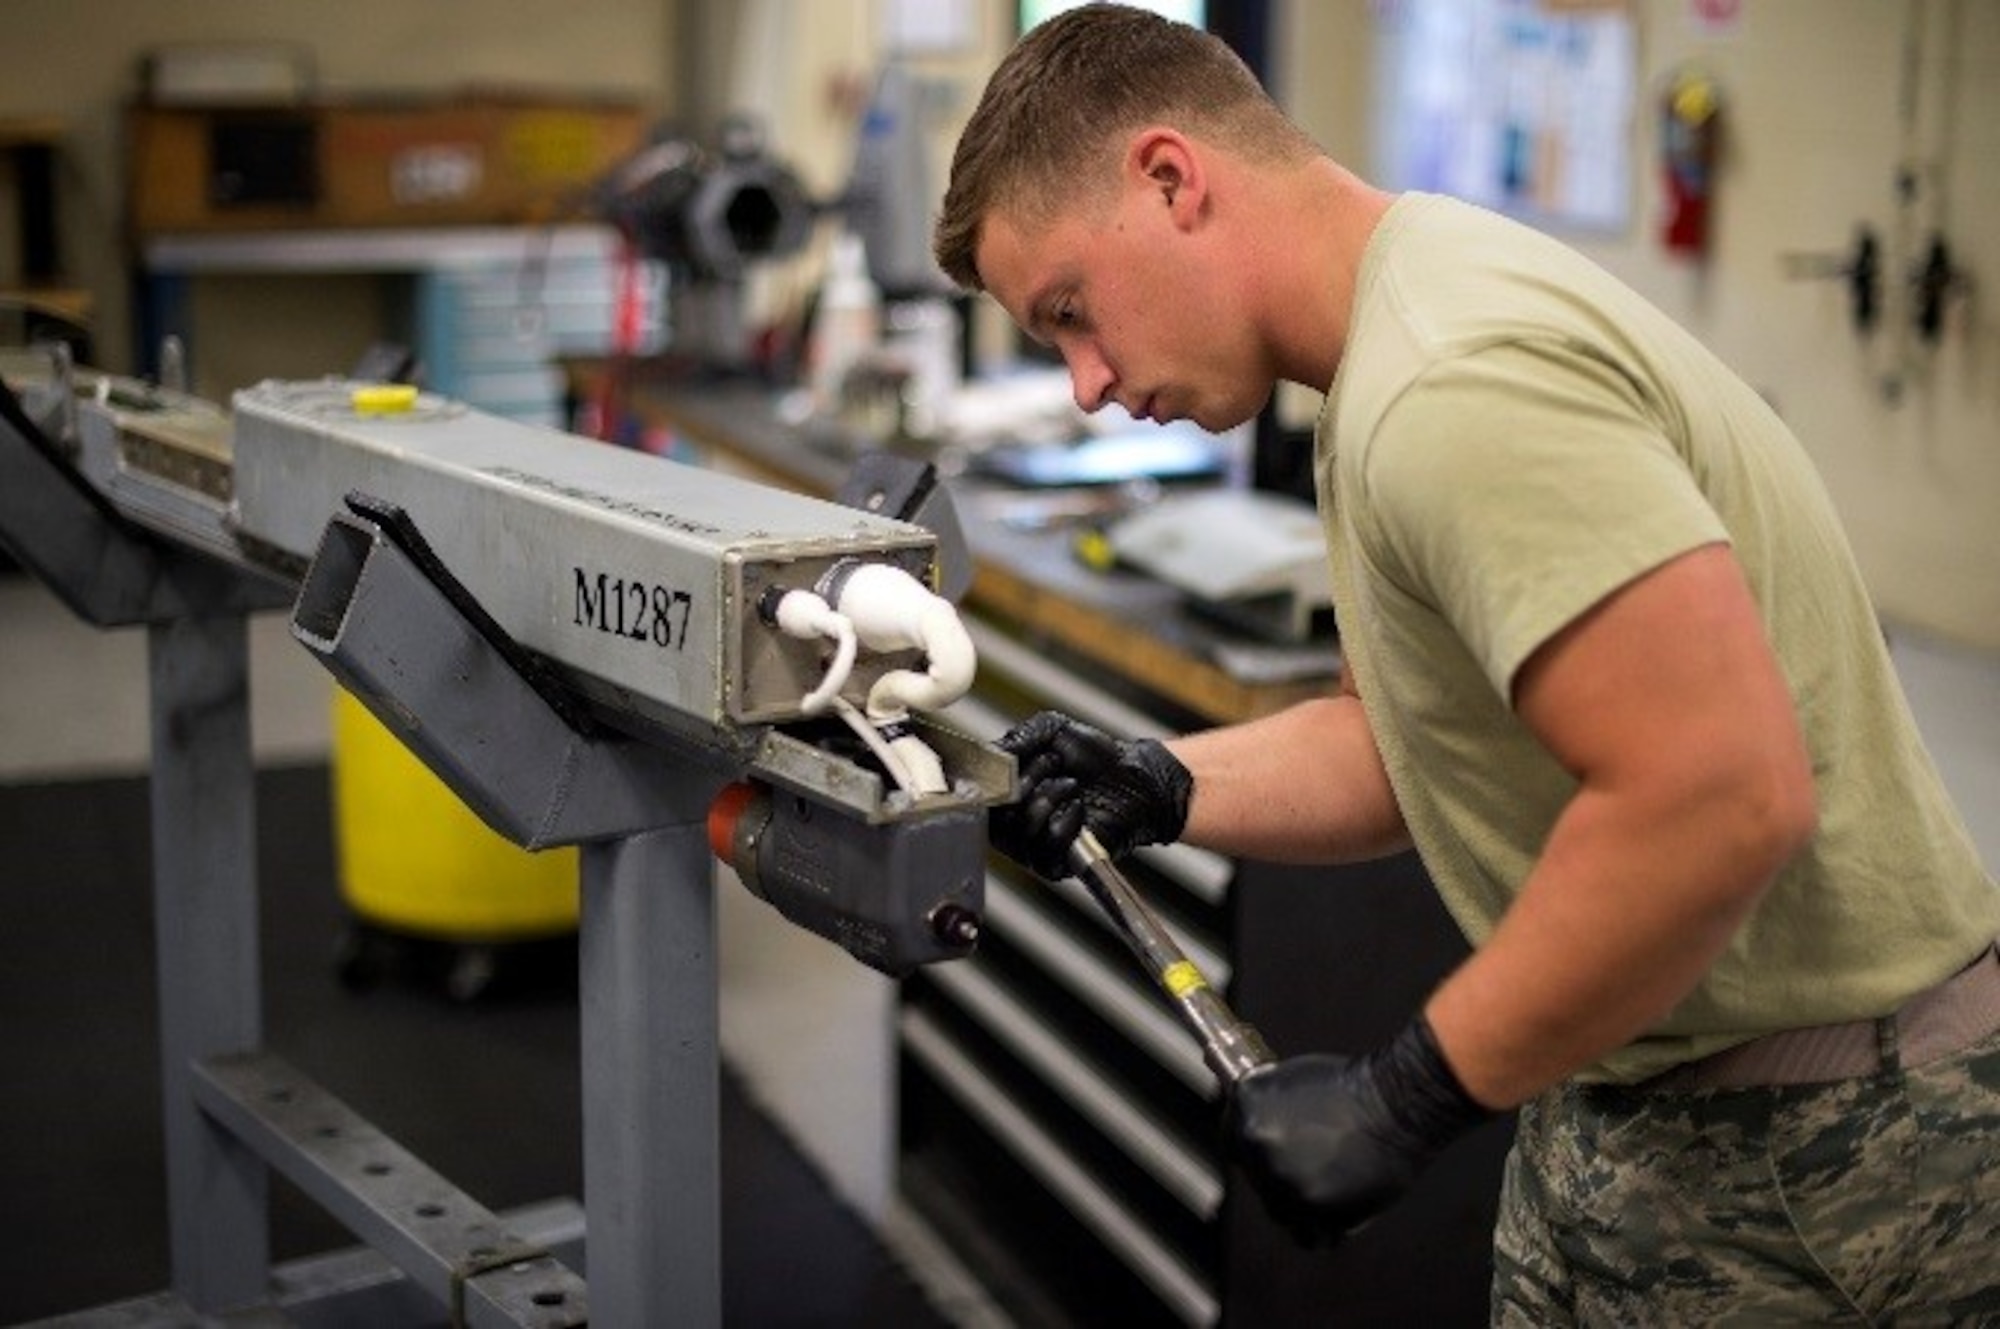 U.S. Air Force Senior Airman Shelby Demorest, 23d Equipment Maintenance Squadron armament technician, checks the torque on a launcher umbilical, June 22, 2016, at Moody Air Force Base, Ga. The Lakeland, Fla., native joined the Marines in 2010 with a job in aviation armament. After his four year contract was up, Demorest went into the Marine Reserves for one year and pursued his new goal of going active duty Air Force. (U.S. Air Force photo by Airman 1st Class Janiqua P. Robinson/Released) 